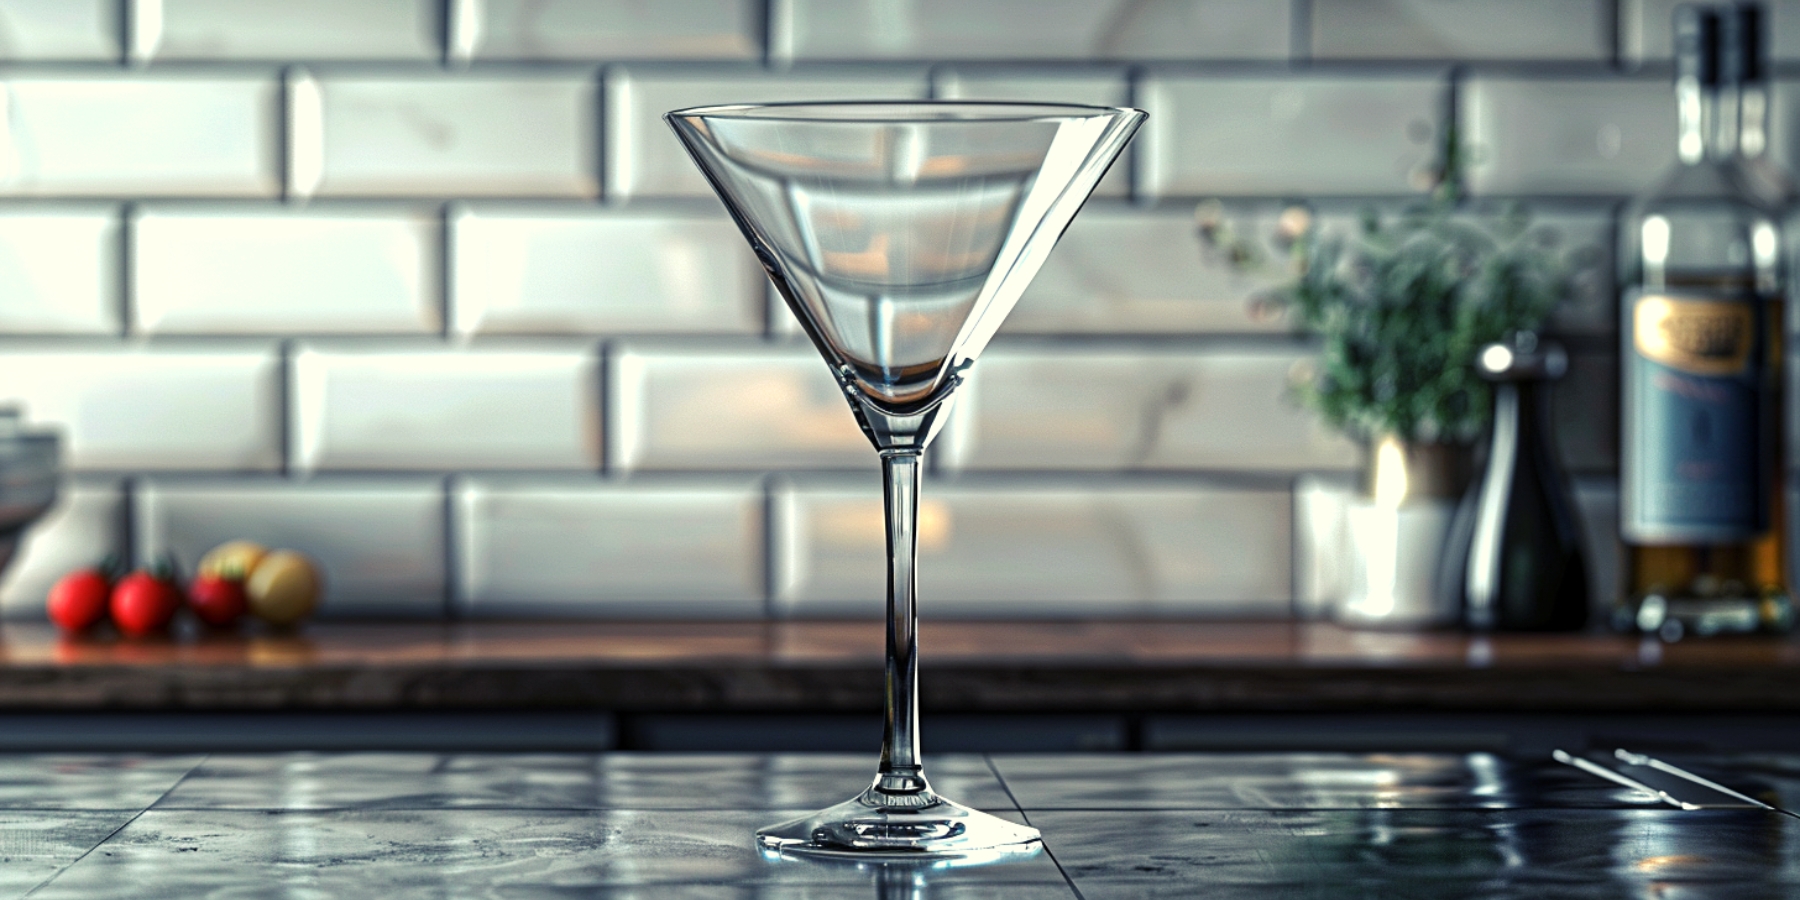 What's your favorite cocktail glassware?